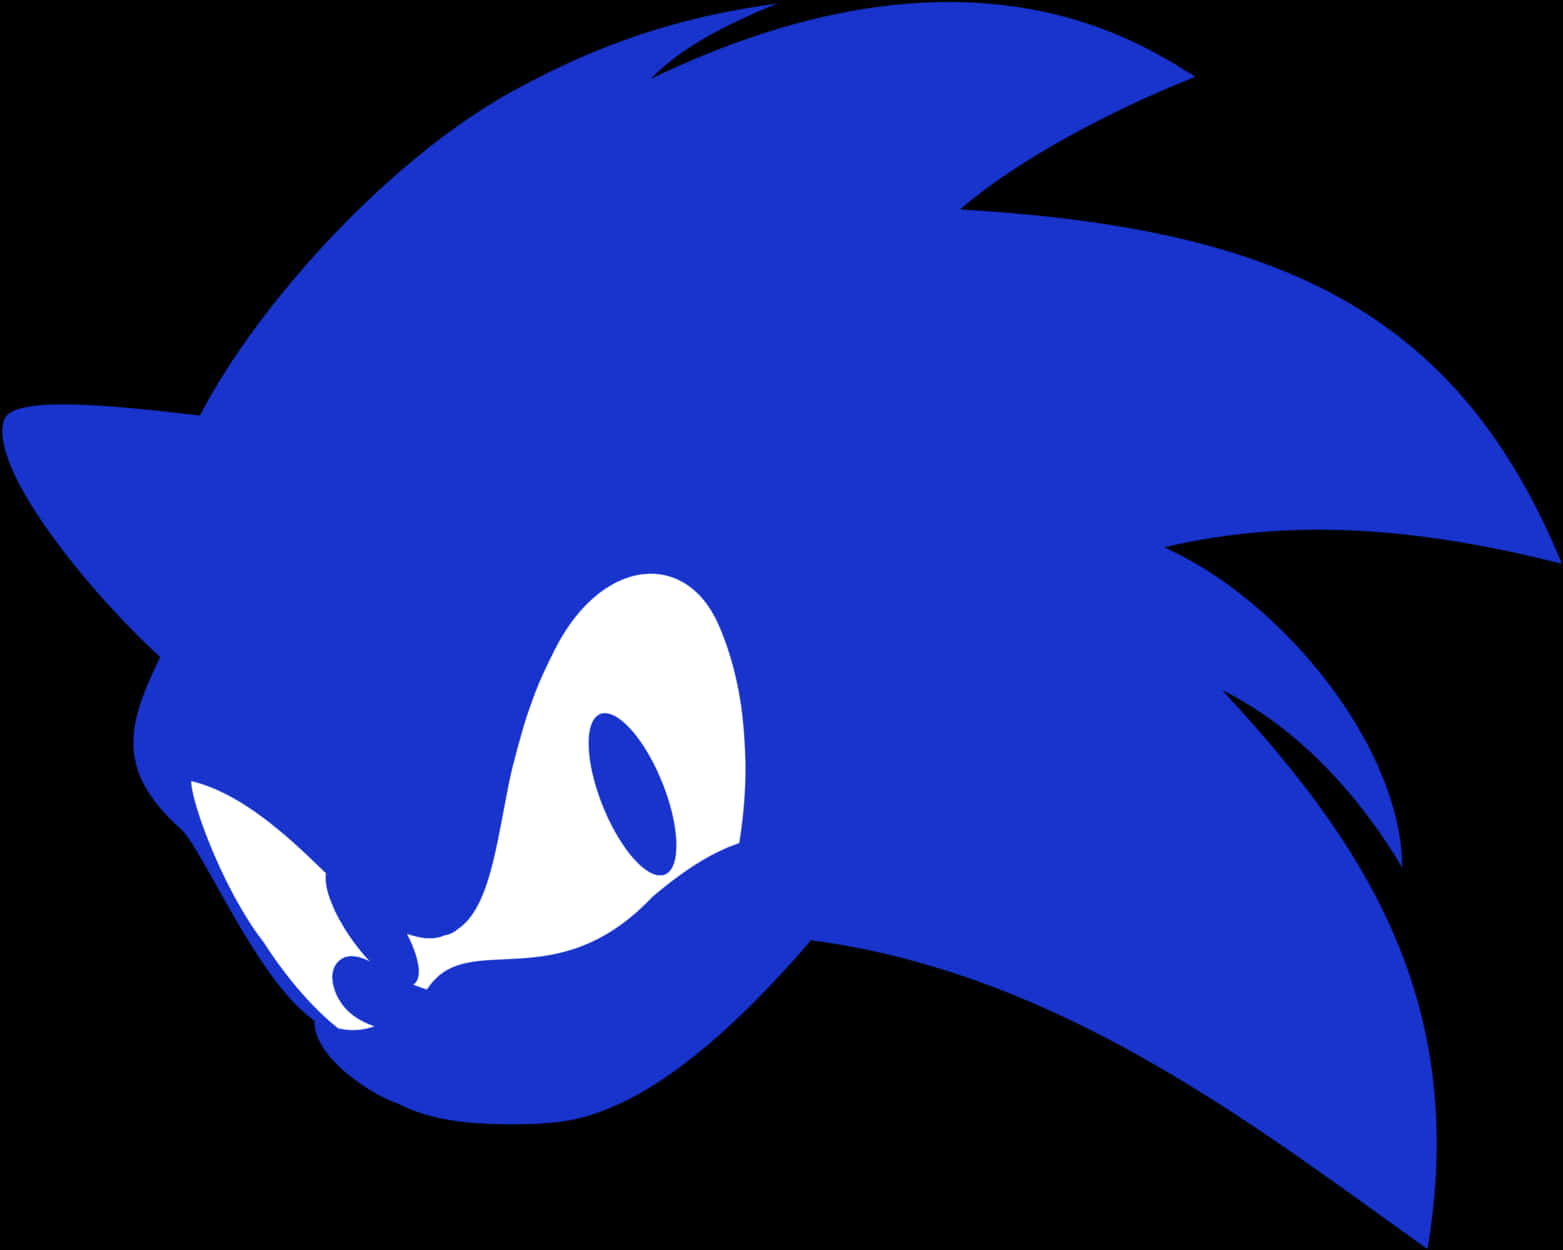 Blue Hedgehog Silhouette Graphic PNG